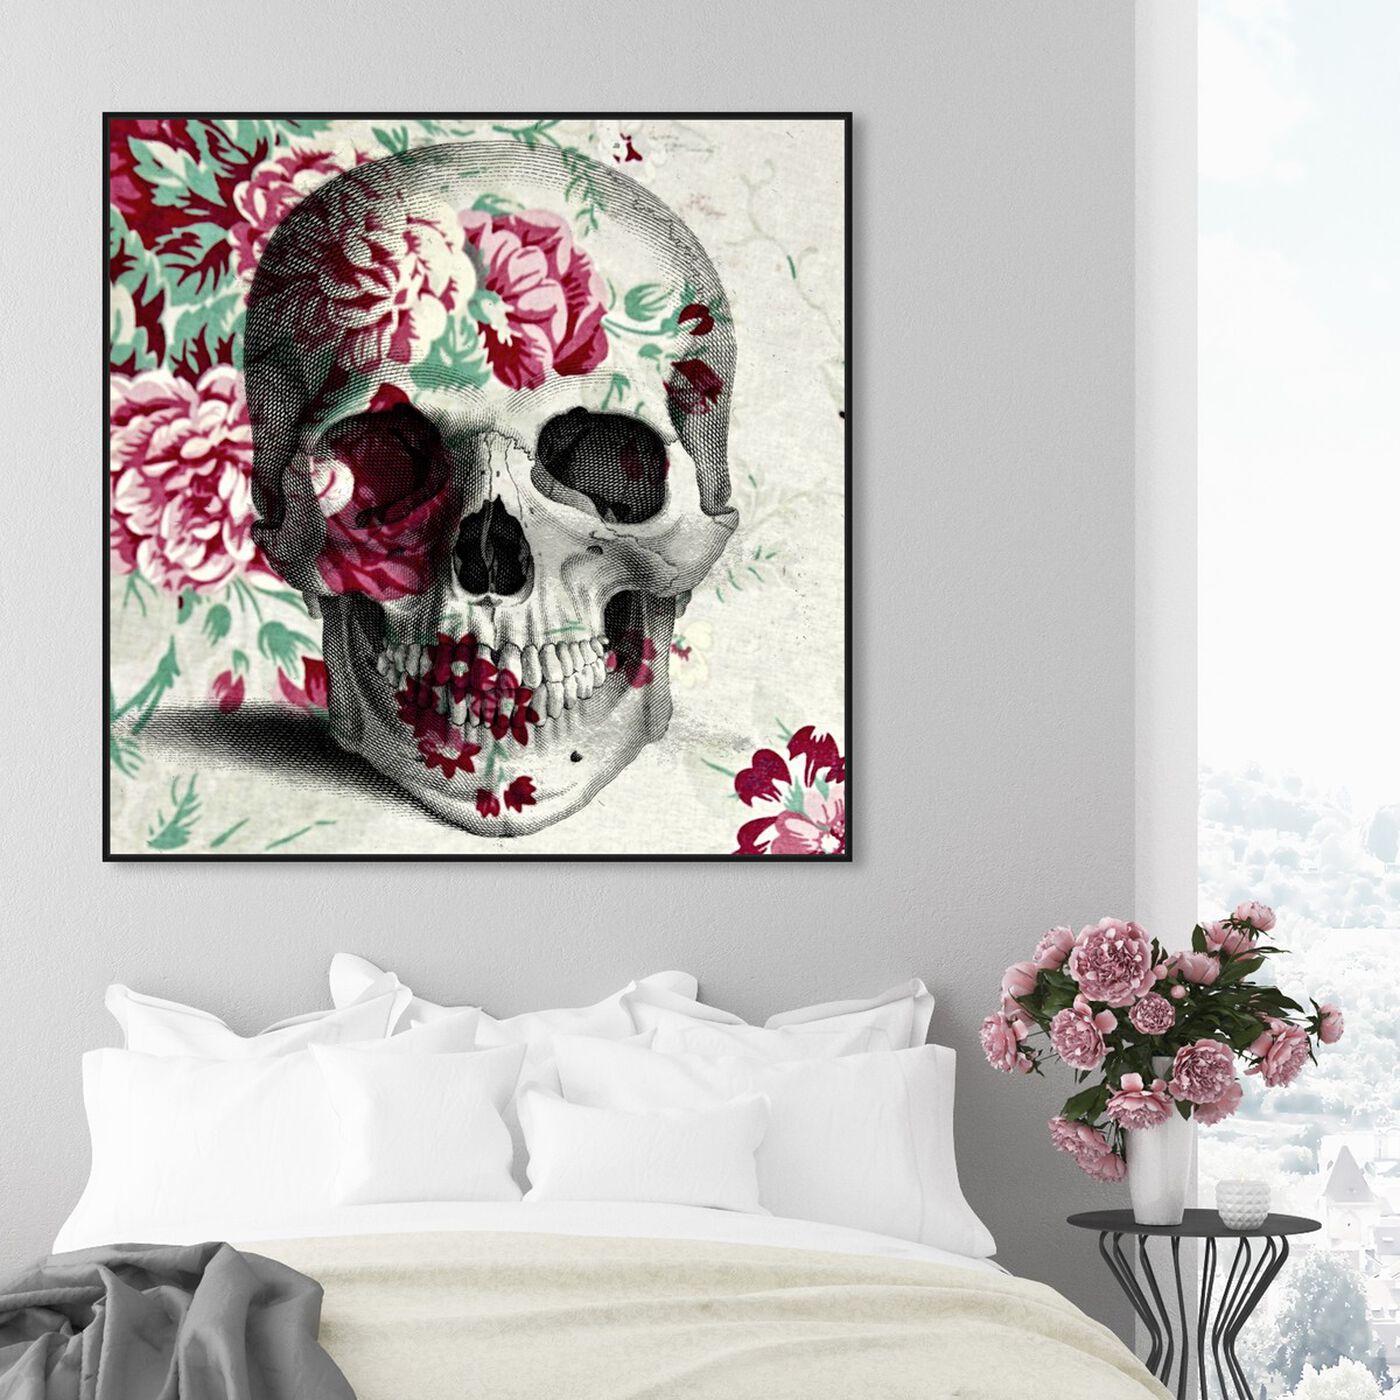 Hanging view of Spring Skull featuring symbols and objects and skull art.